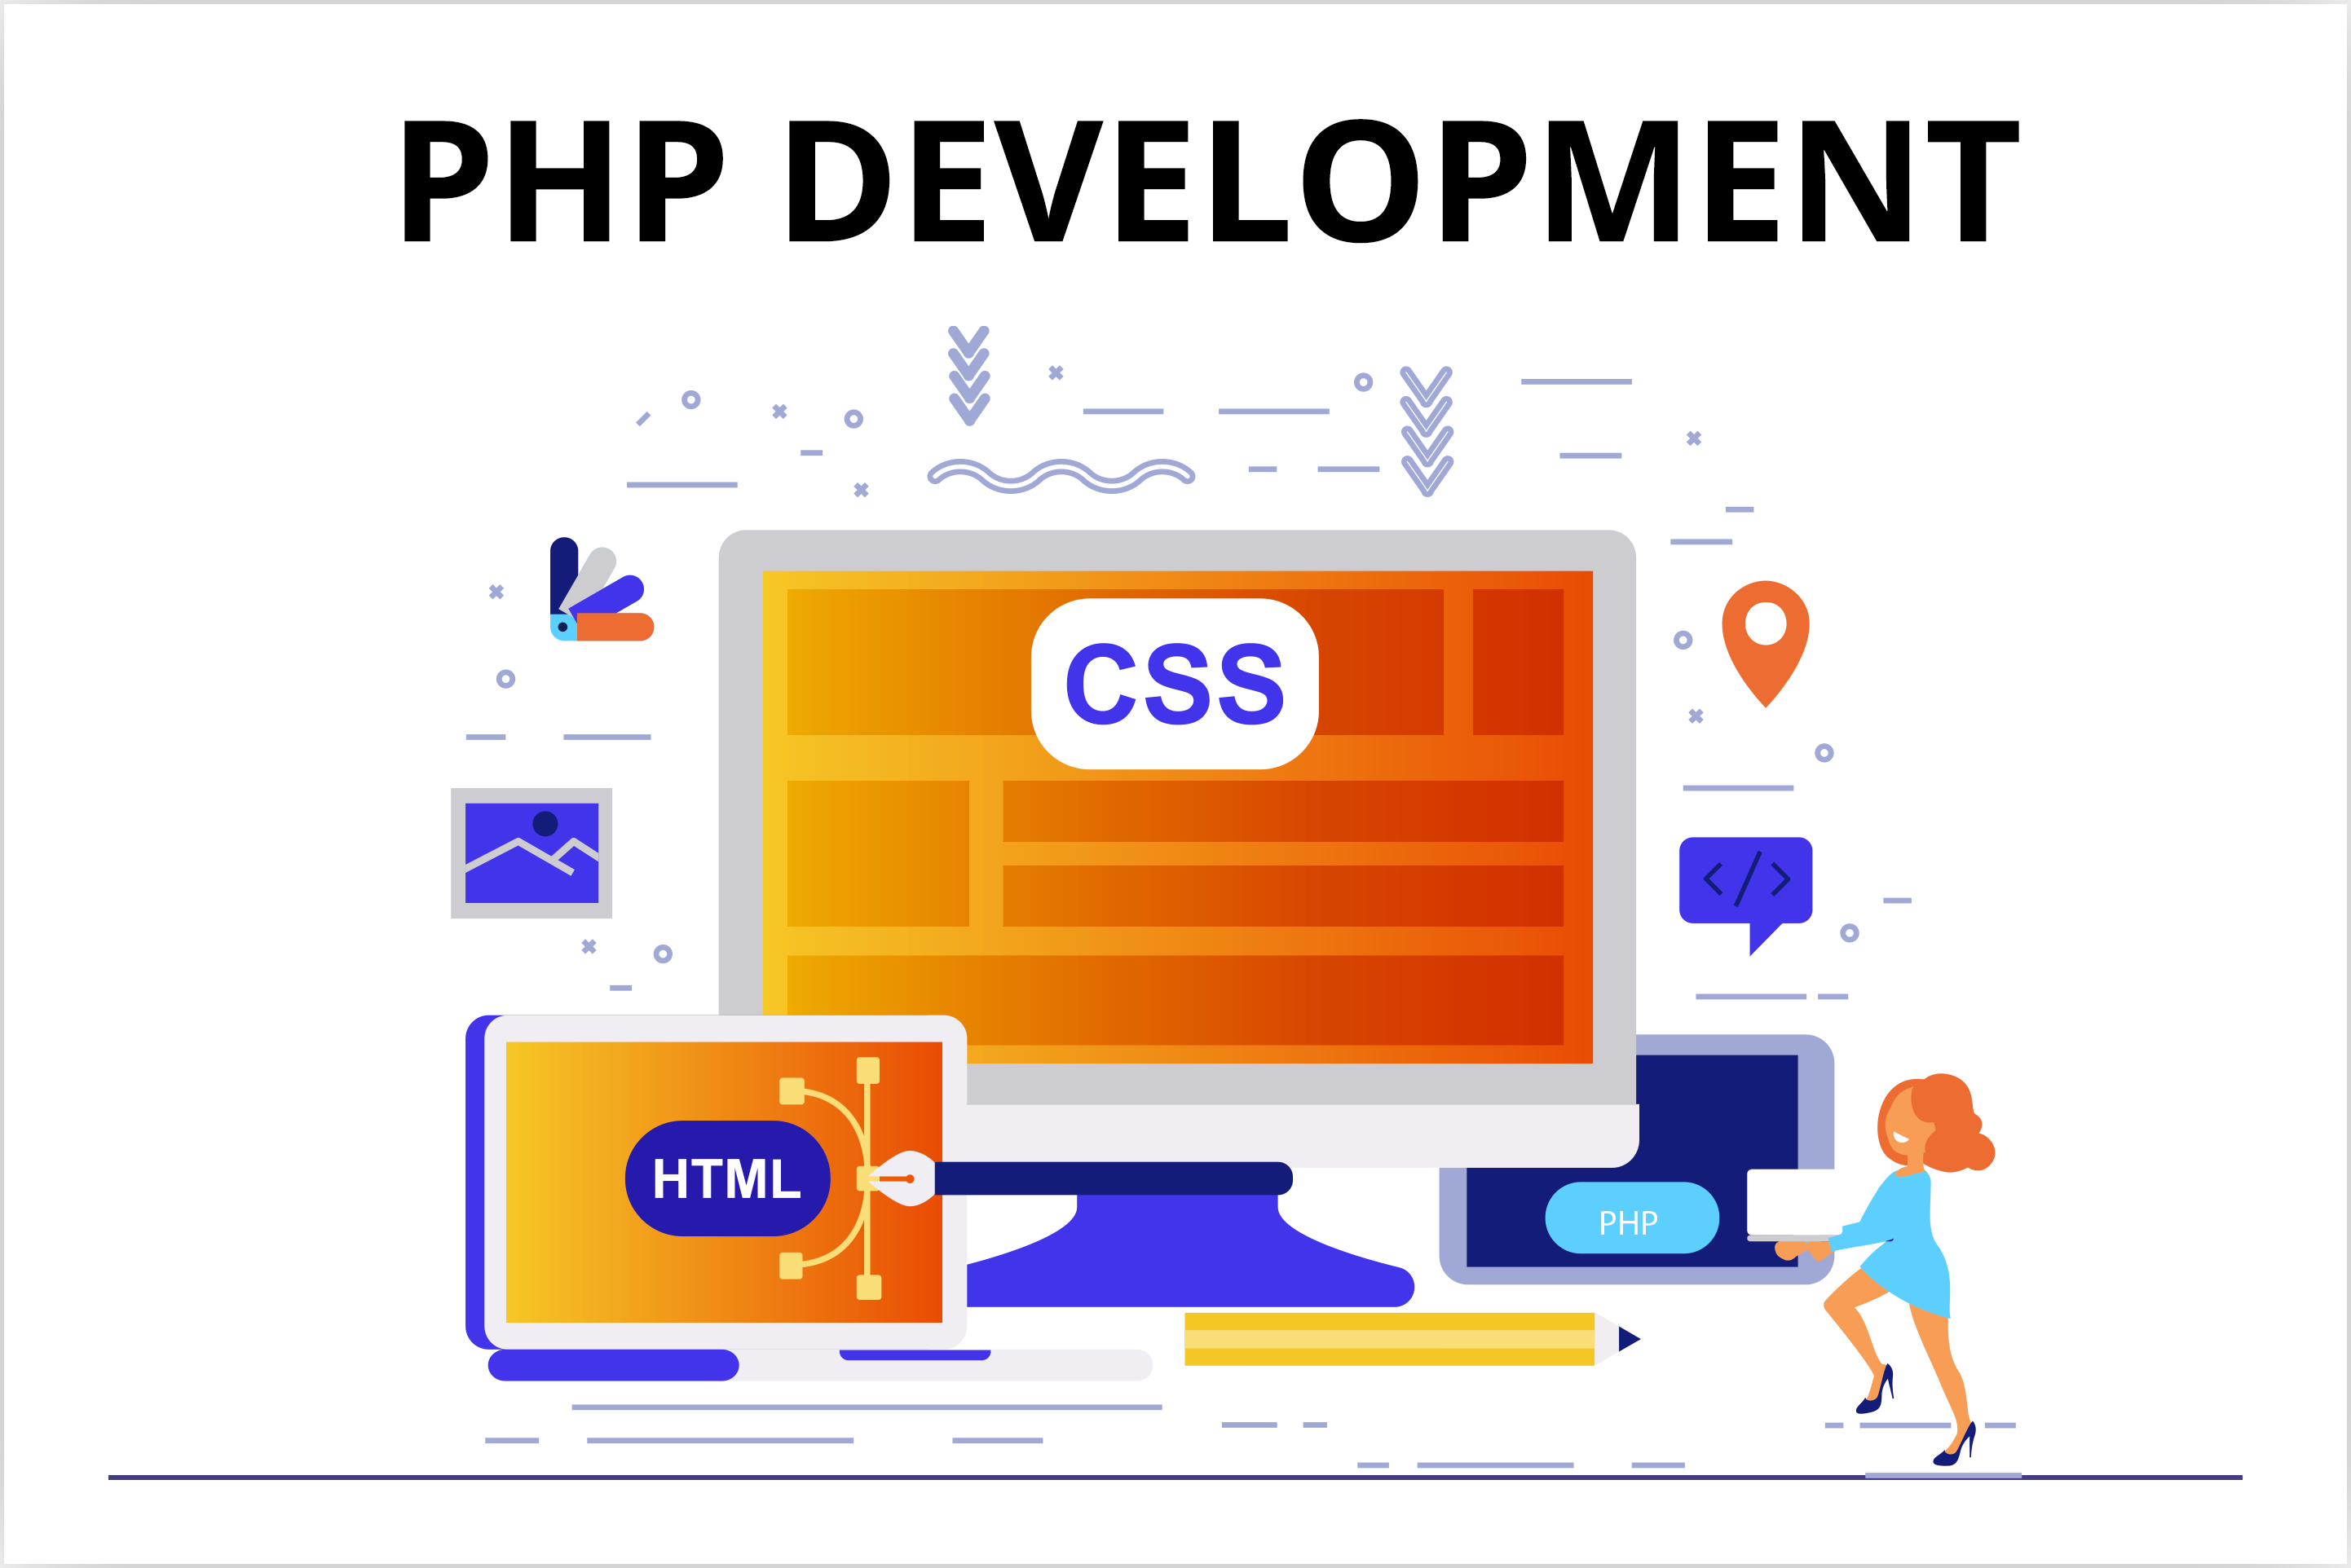 PHP Development Company in Sydney Australia | Hire PHP Developers and Experts in Australia